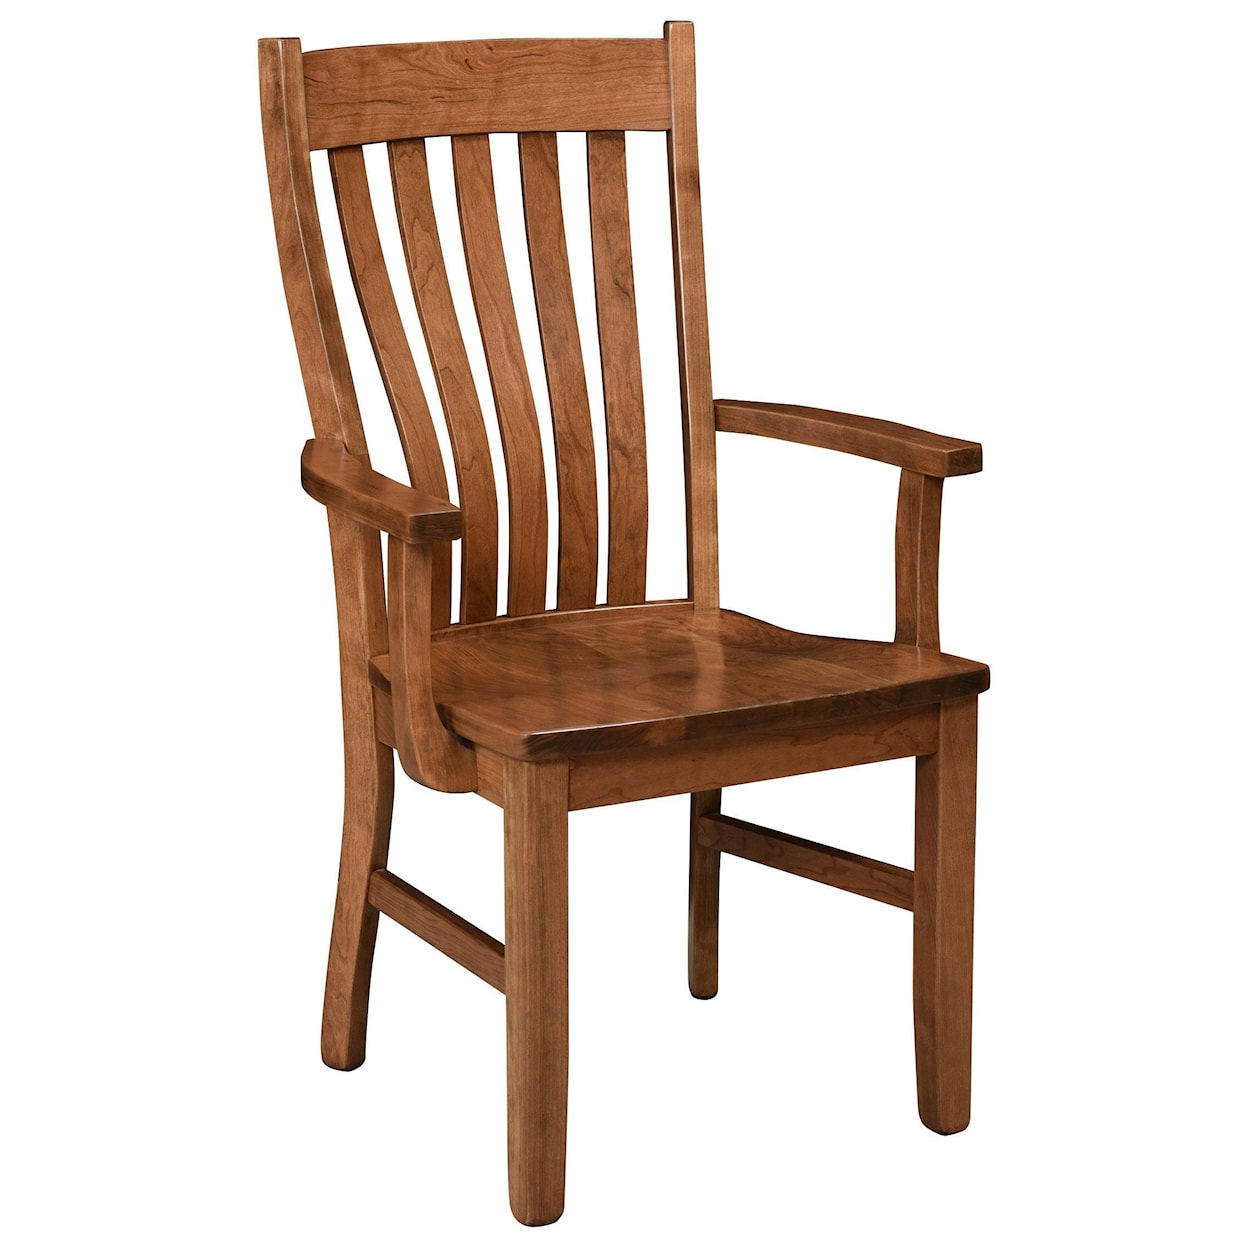 Wengerd Wood Products Rockpoint Arm Chair